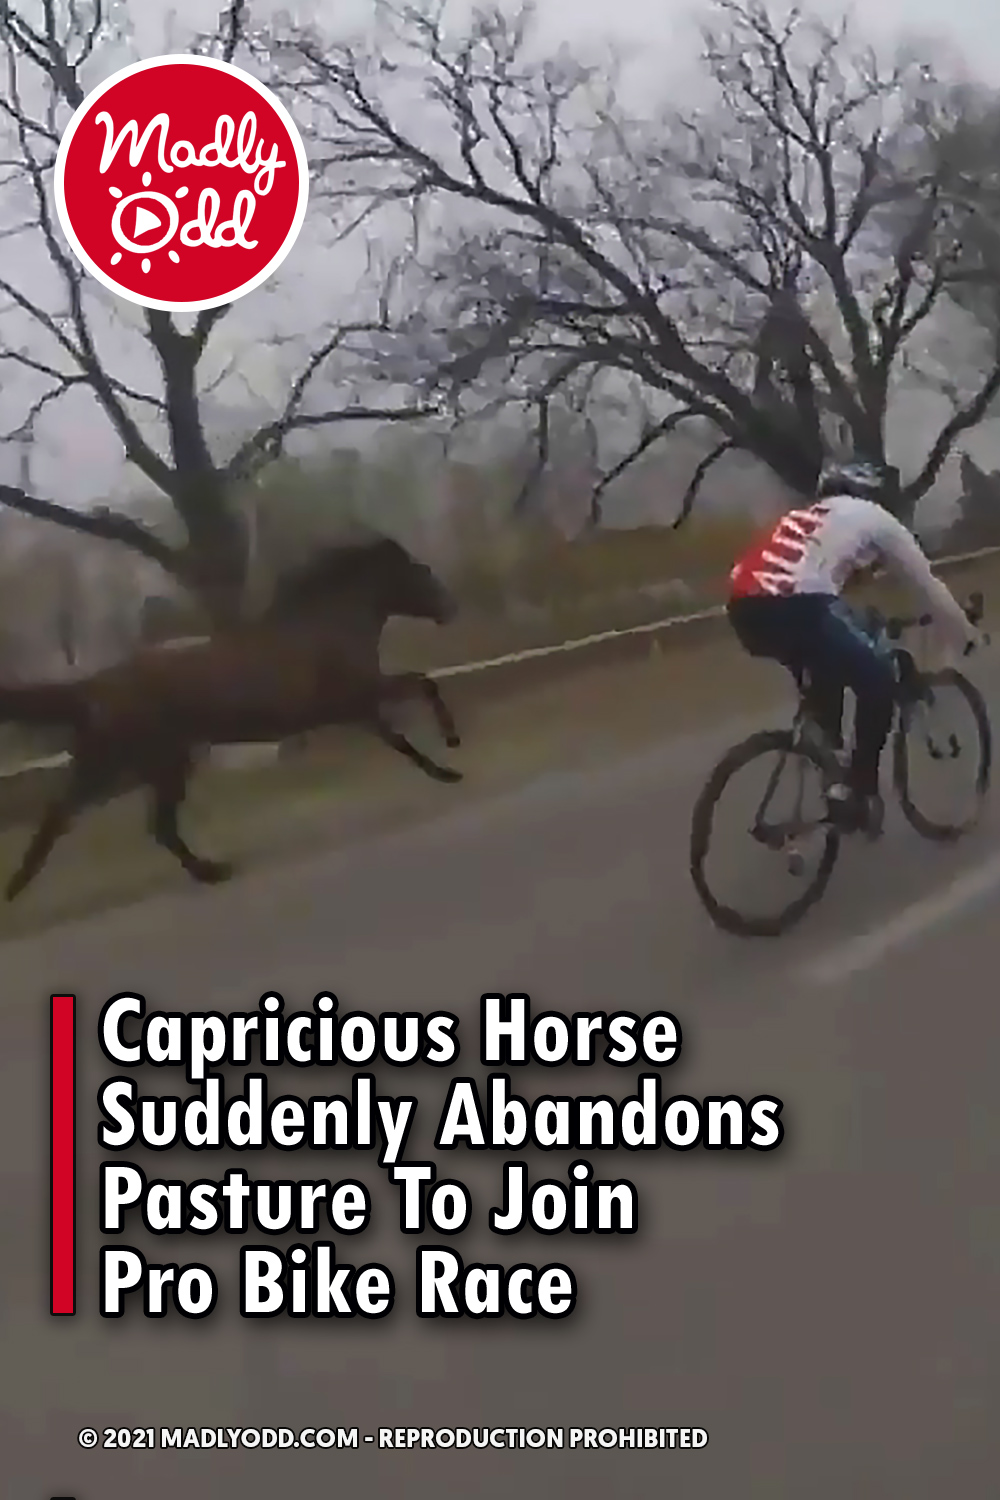 Capricious Horse Suddenly Abandons Pasture To Join Pro Bike Race